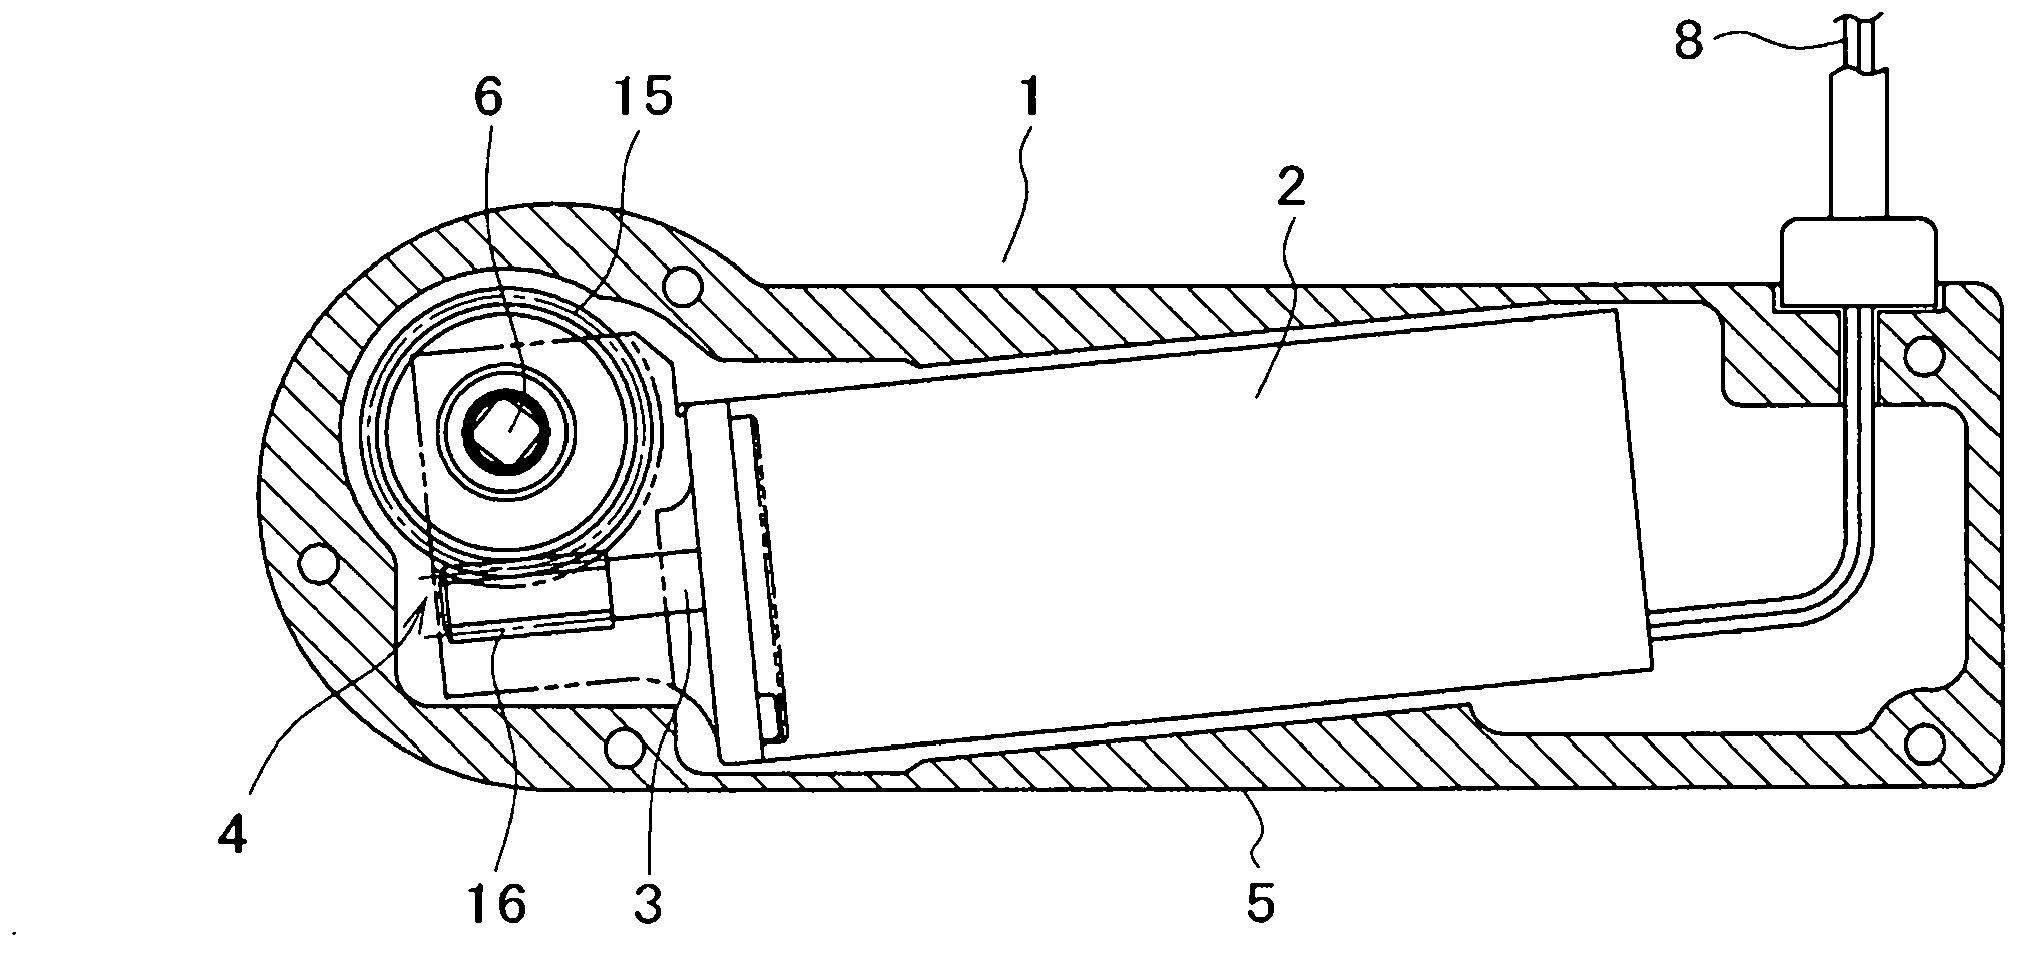 Manual power generation device for driving actuator, and actuator drive device